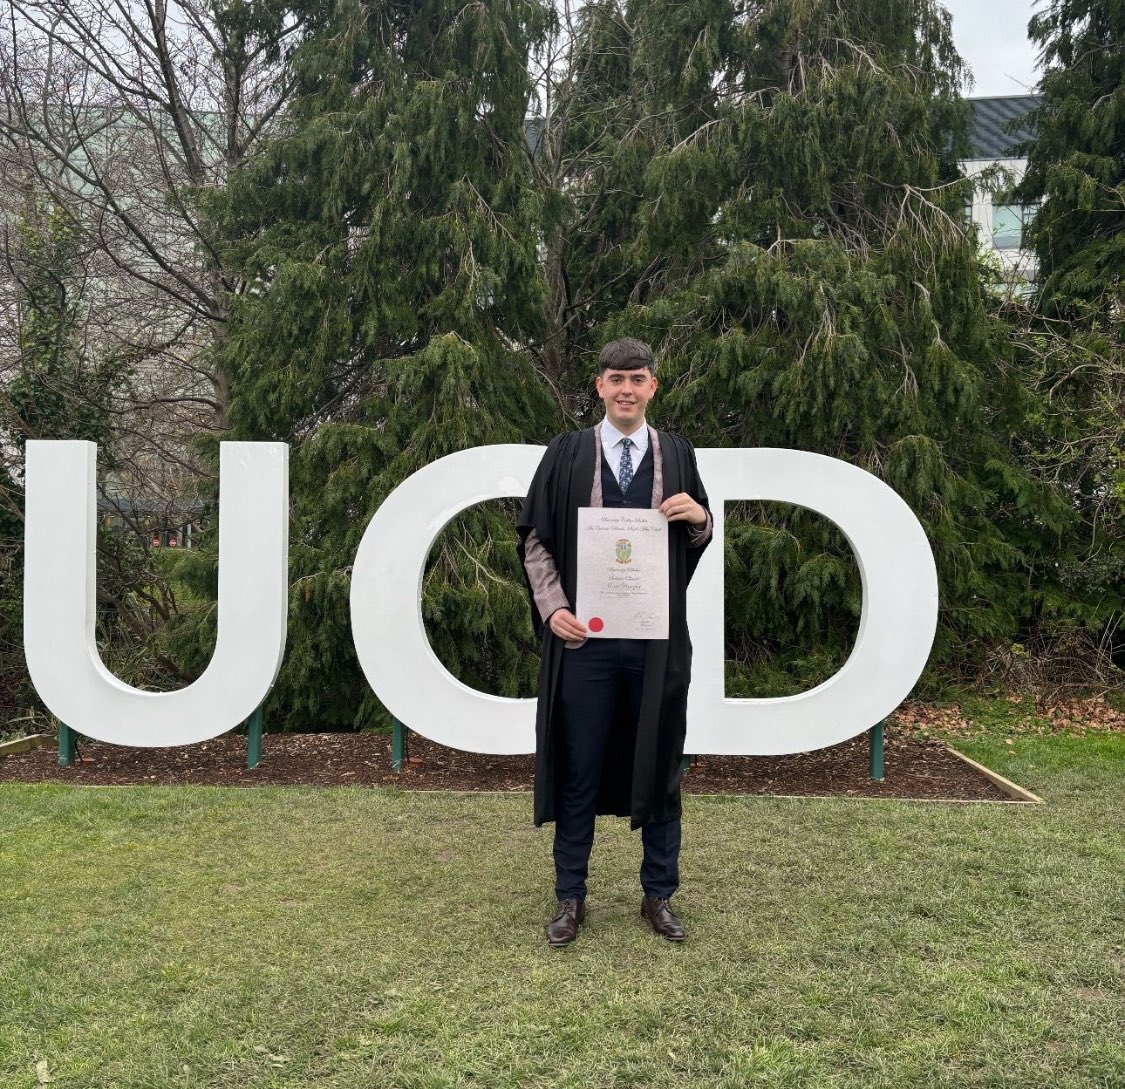 Congratulations to past pupil Shane Murphy who recently received the Stage 3 Scholarship in BSc Sport & Exercise Management at this year’s UCD awards ceremony. Well done Shane. A bright future awaits you. 🙌🏼 #cbsfamily #alumni #academic #excellence